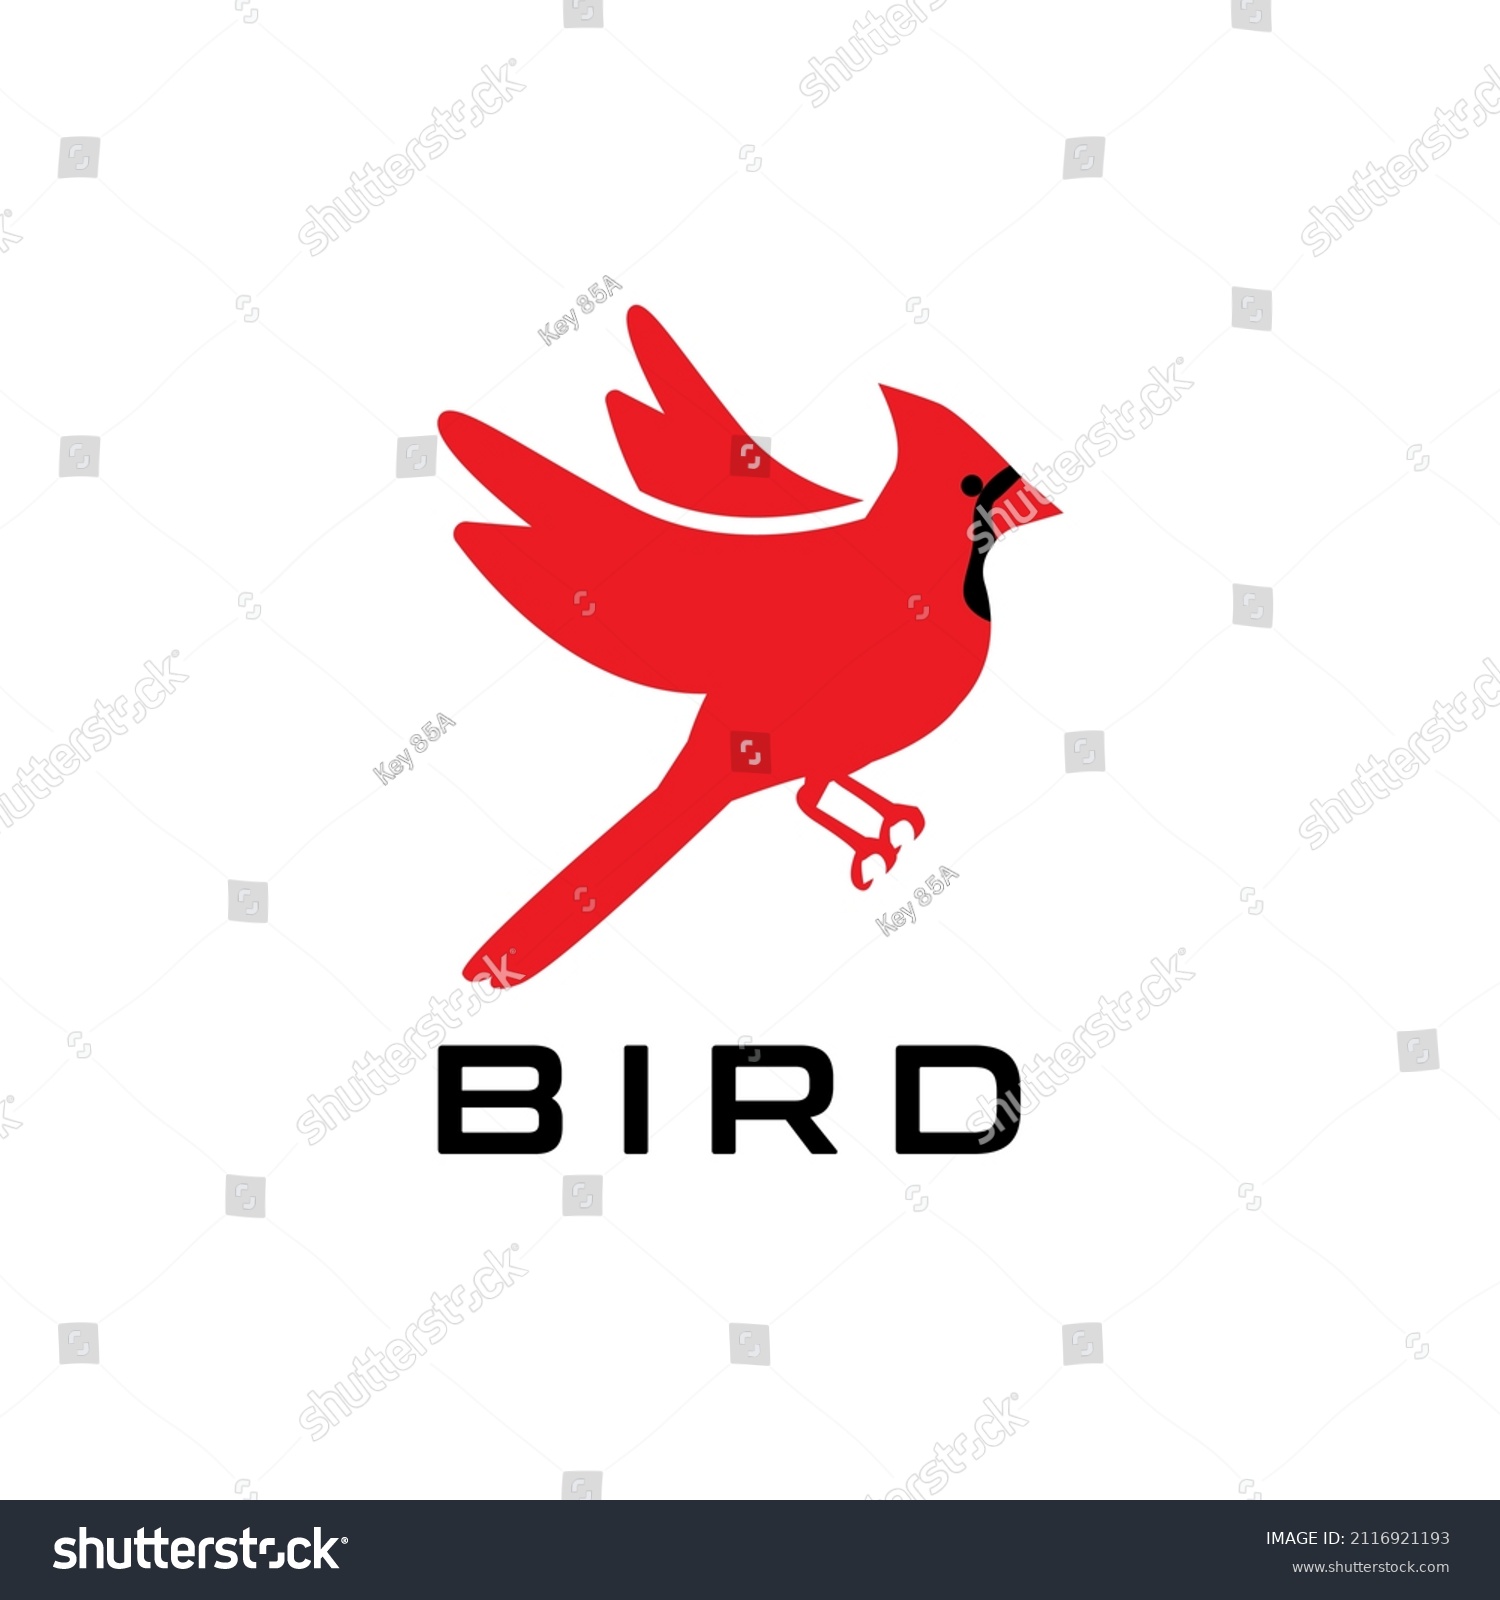 Abstract Flying Red Bird Logo Design Stock Vector (Royalty Free ...